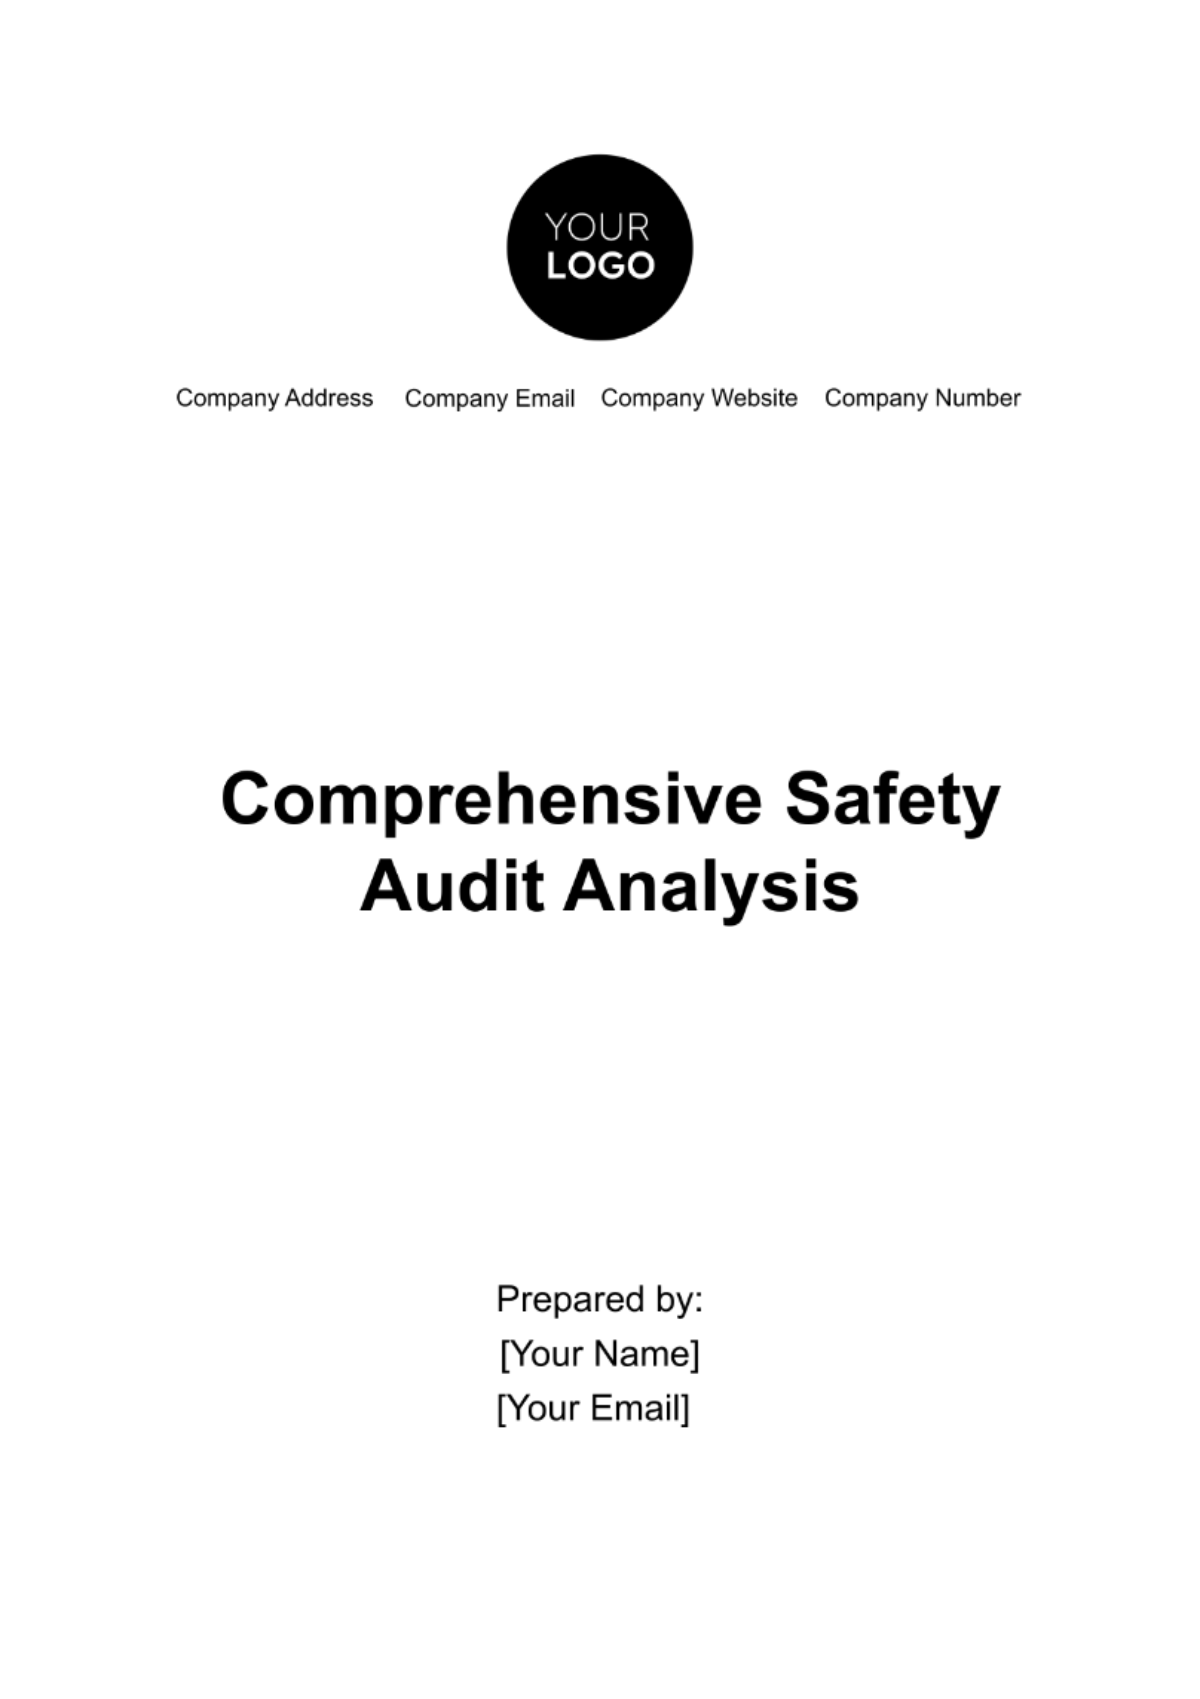 Comprehensive Safety Audit Analysis Template